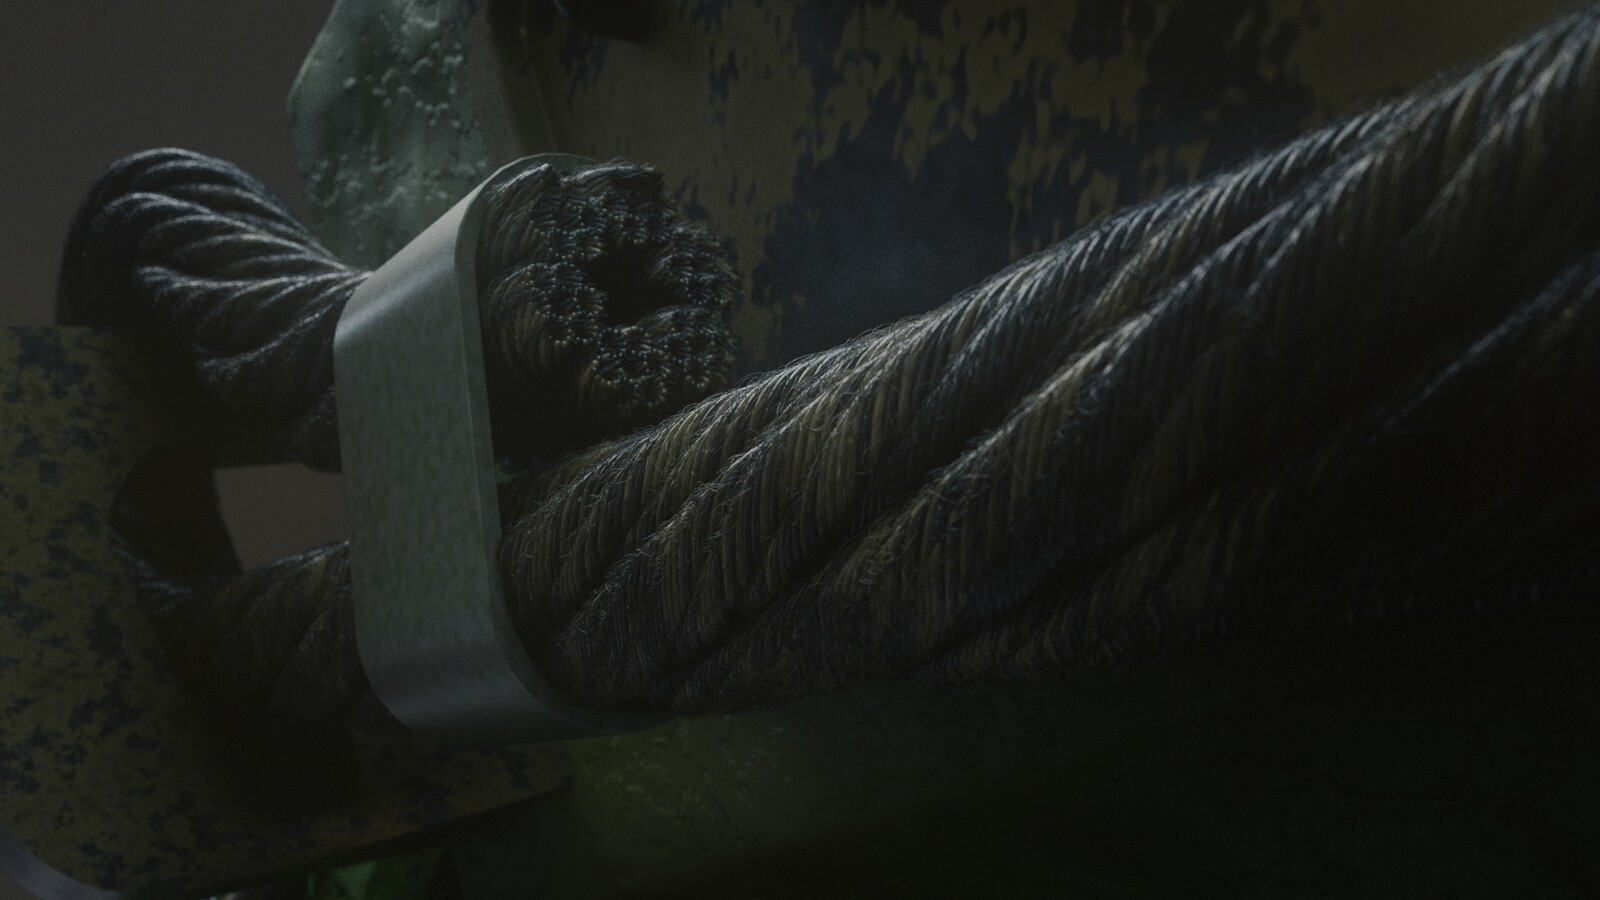 //edit i decided to also render rope in closeup. 